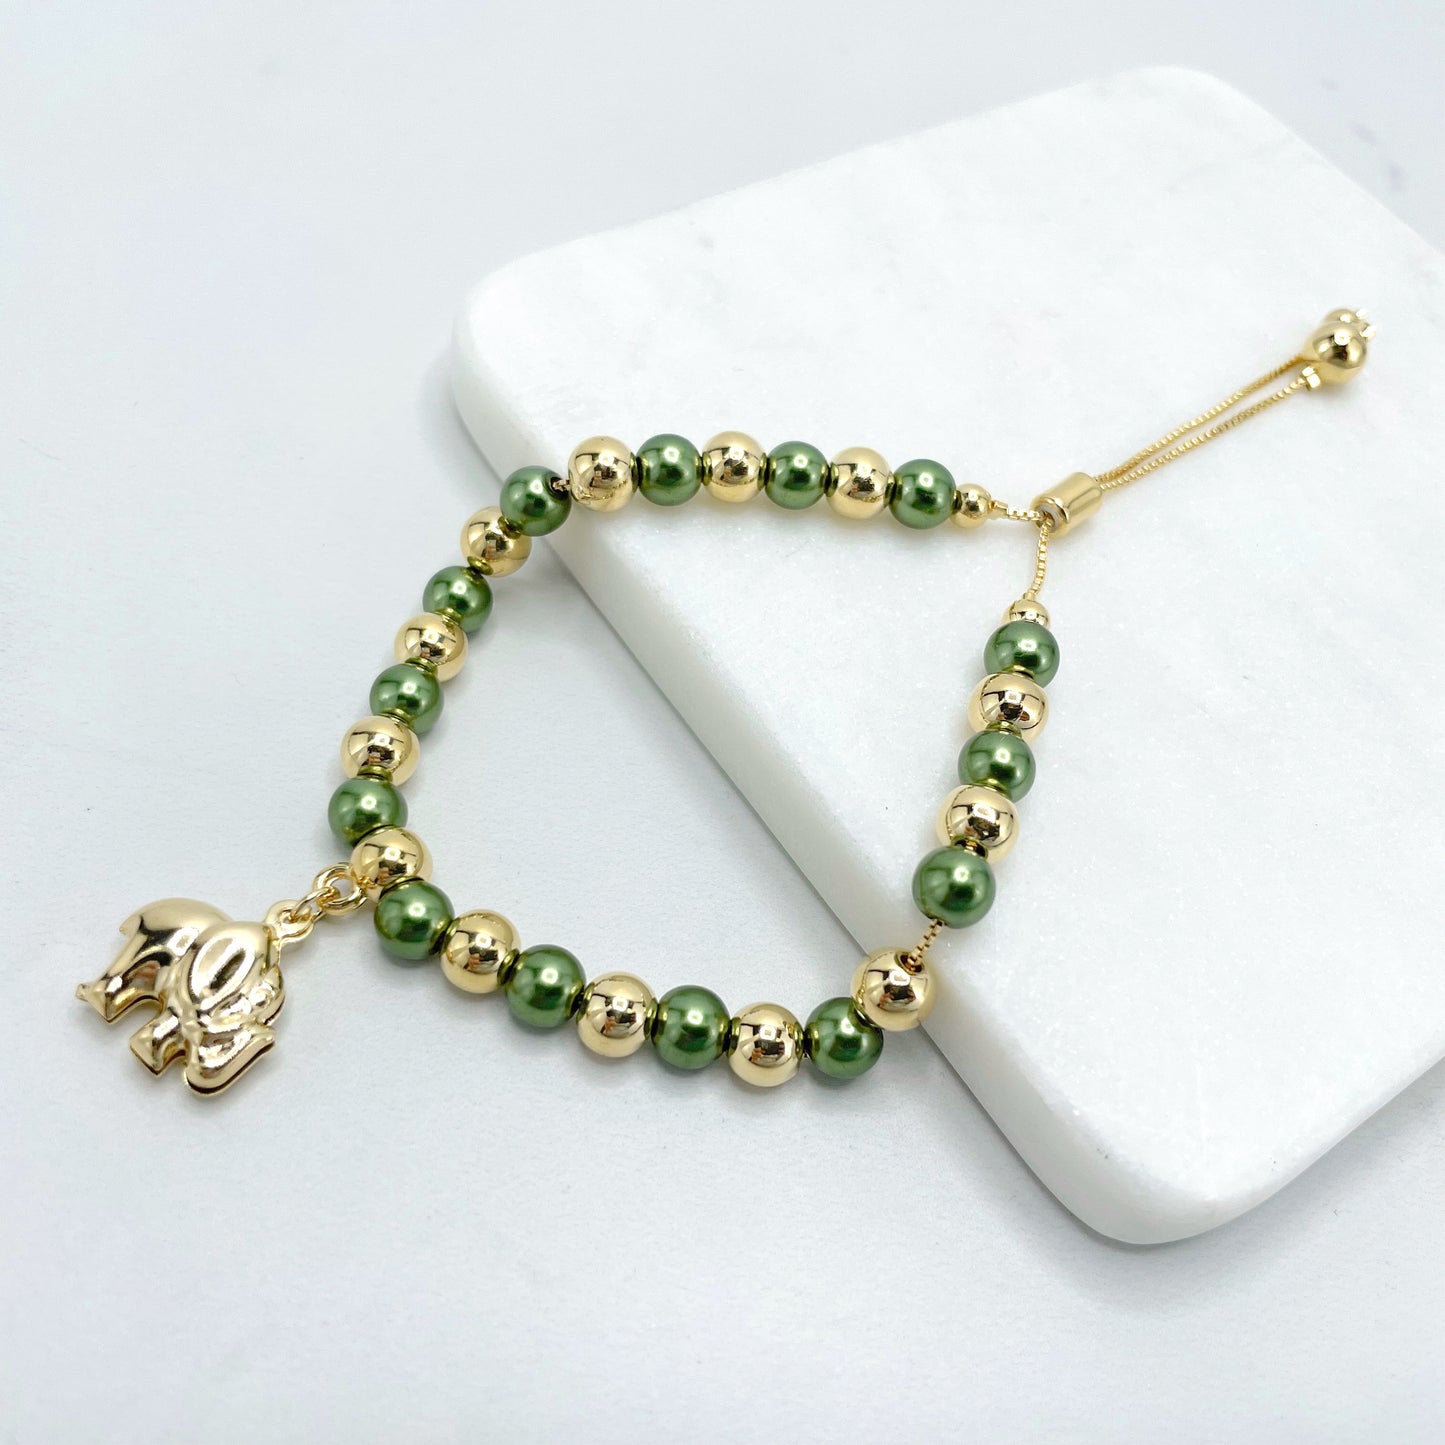 18k Gold Filled 1mm Box Chain with Green & Gold Beads, Elephant Charms, Adjustable Beaded Bracelet, Wholesale Jewelry Making Supplies